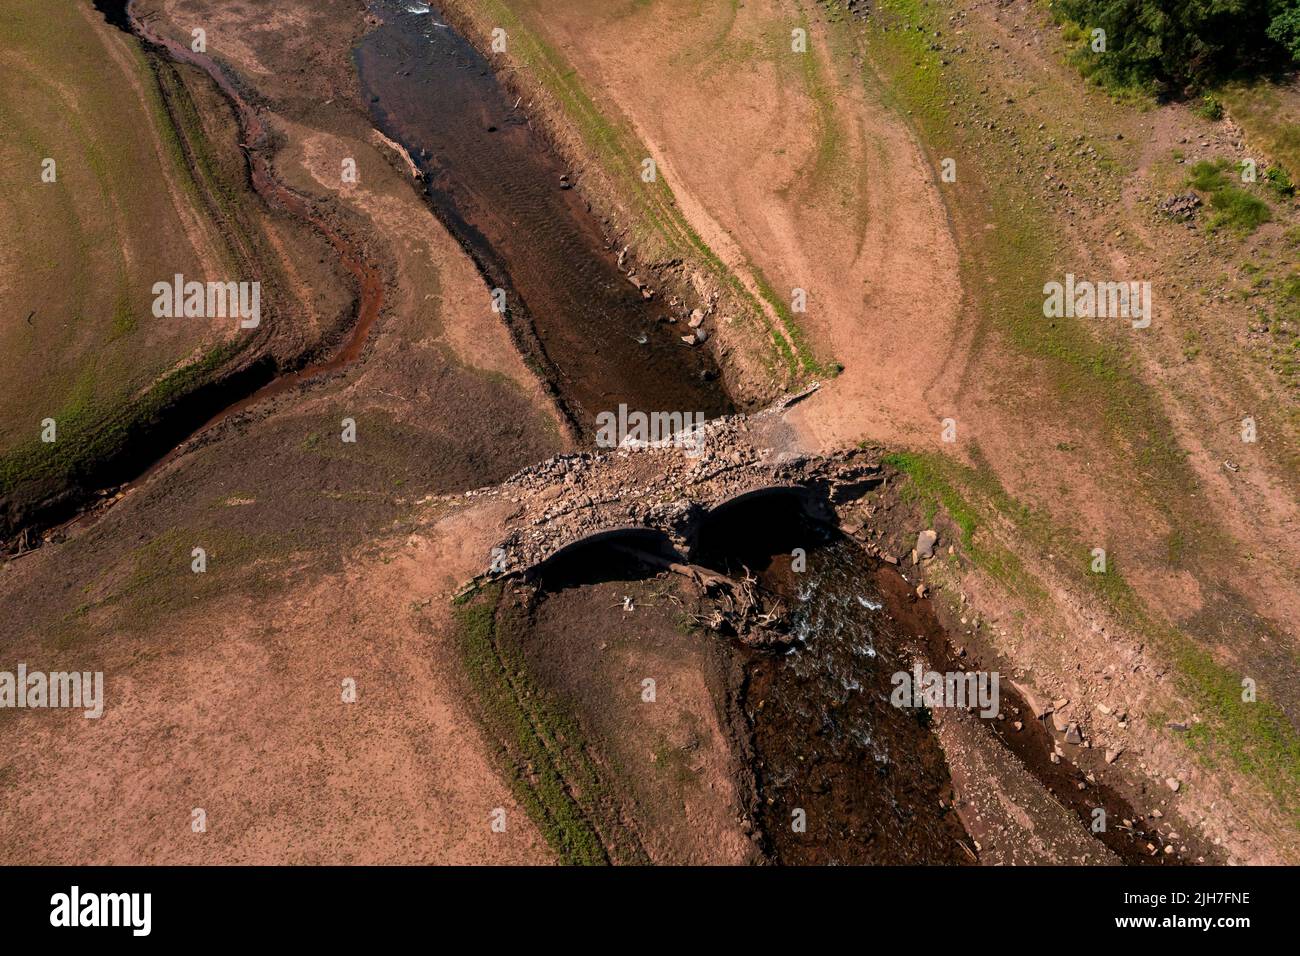 MERTHYR TYDFIL, WALES - JULY 16: An aerial view of an exposed bridge normally underwater at the Llwyn-on Reservoir, the largest of the three reservoir Stock Photo